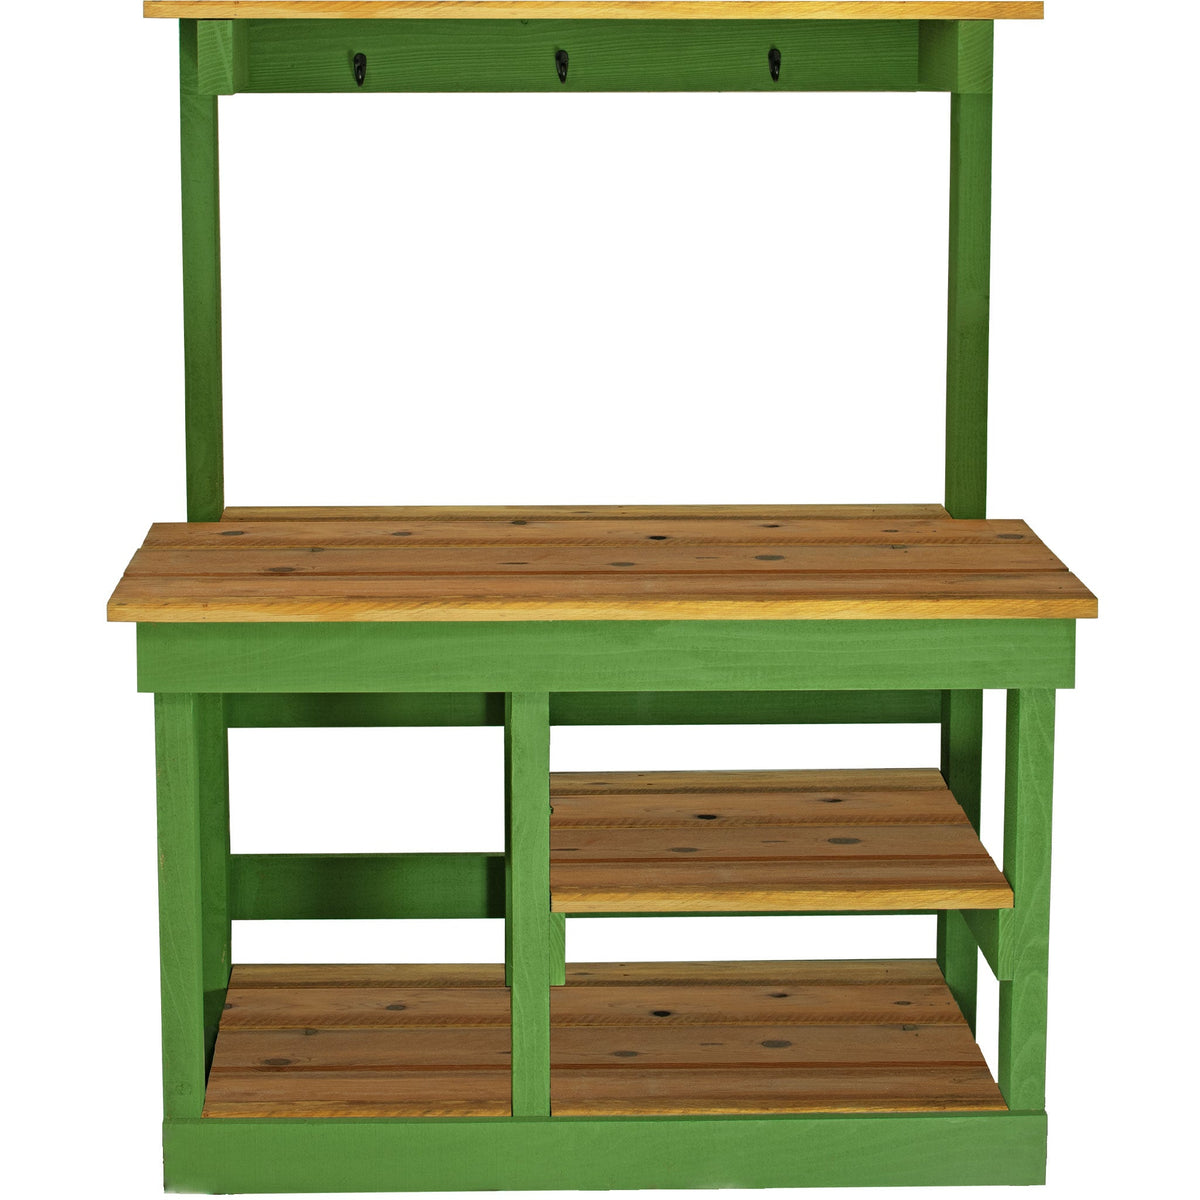 The Painted Greenhouse Frame Style of Lee Display's Rustic Gardening Workbench on sale now at leedisplay.com